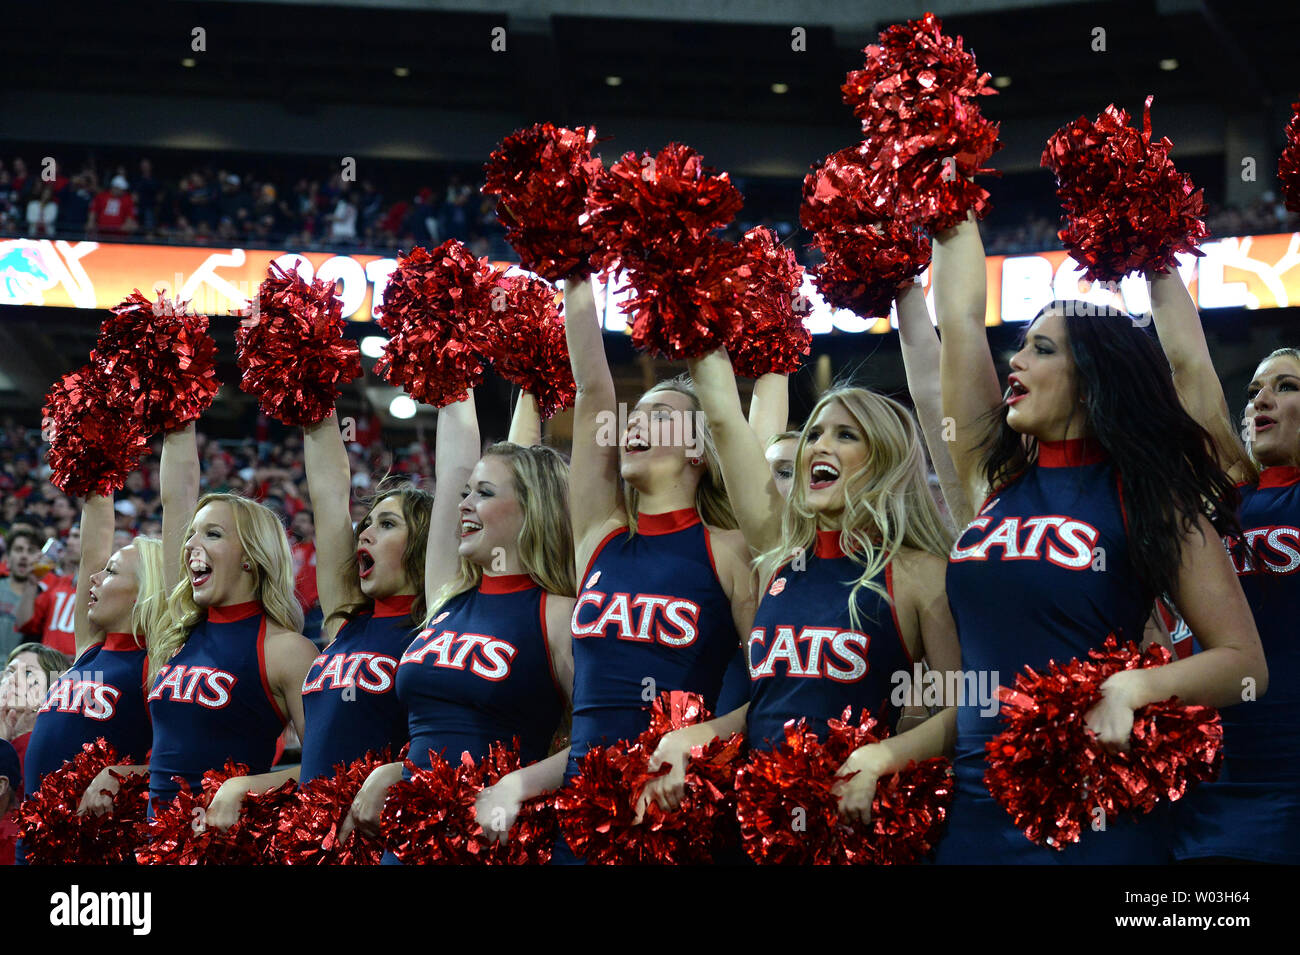 arizona-wildcats-cheerleaders-celebrate-a-touchdown-by-the-wildcats-in-the-second-quarter-of-the-fiesta-bowl-between-the-wildcats-and-the-boise-state-broncos-at-university-of-phoenix-stadium-in-glendale-arizona-december-31-2014-upiart-foxall-W03H64.jpg